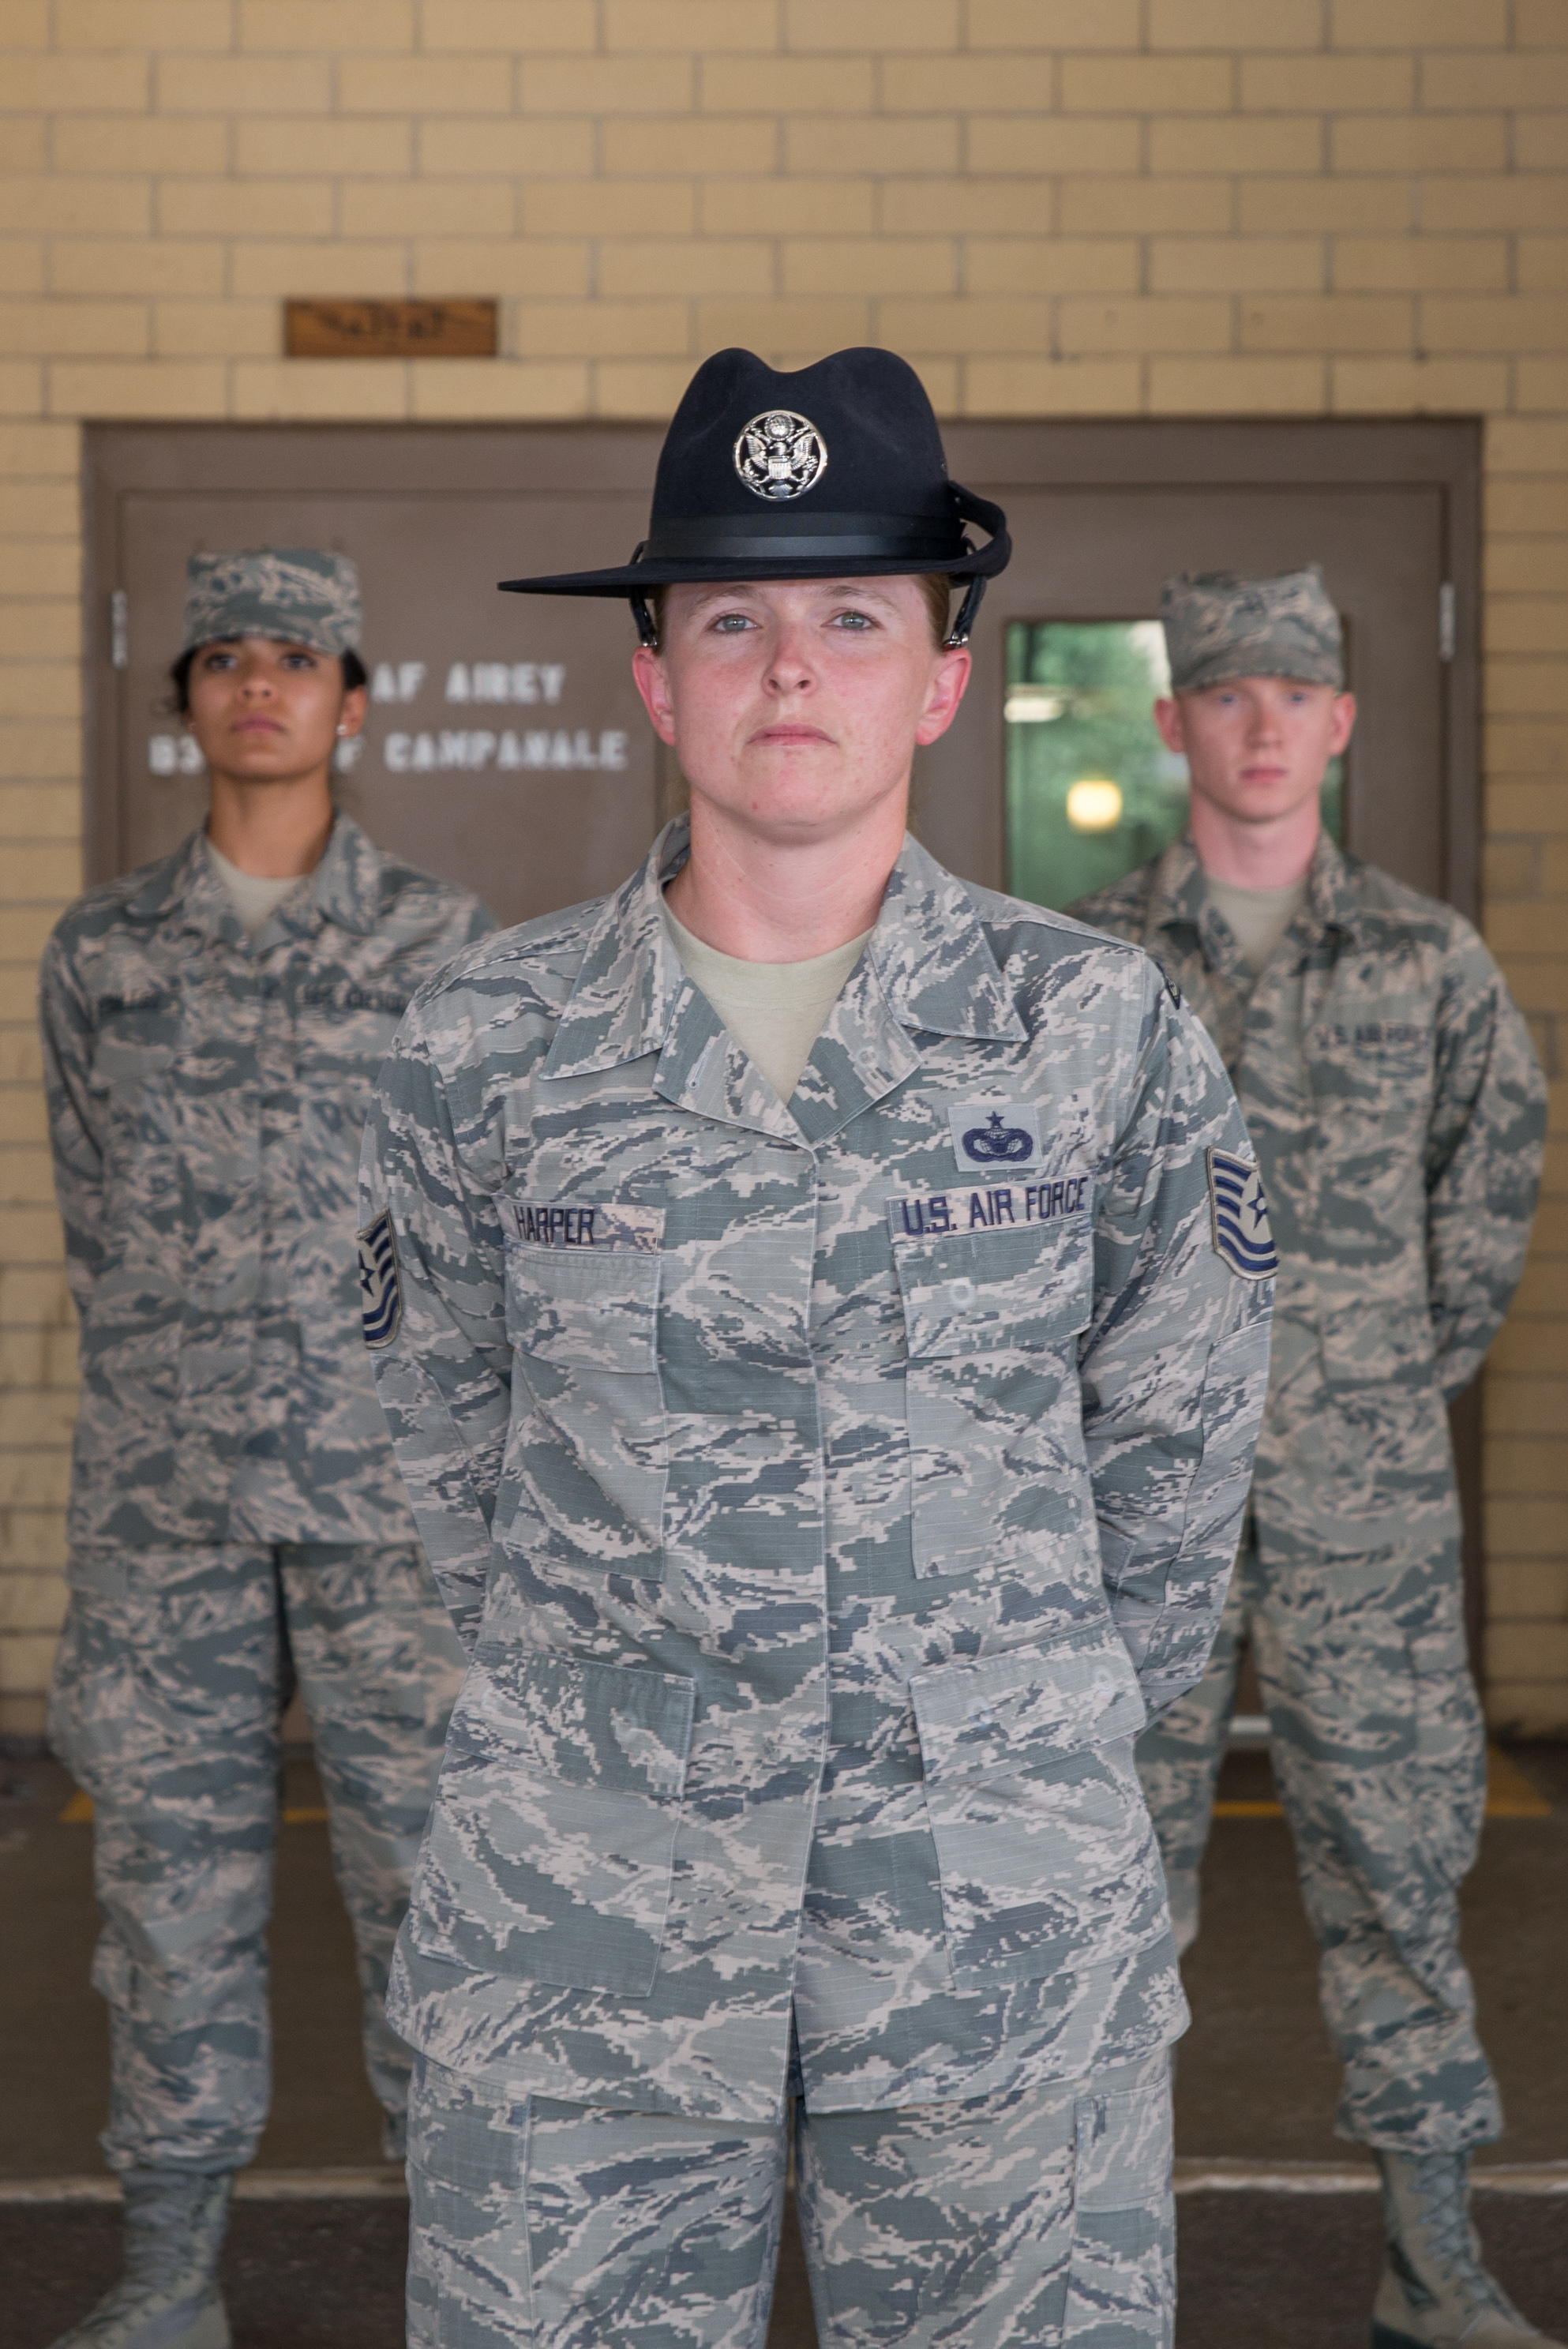 Air Force MTI named Military Times Airman of the Year > Air Force